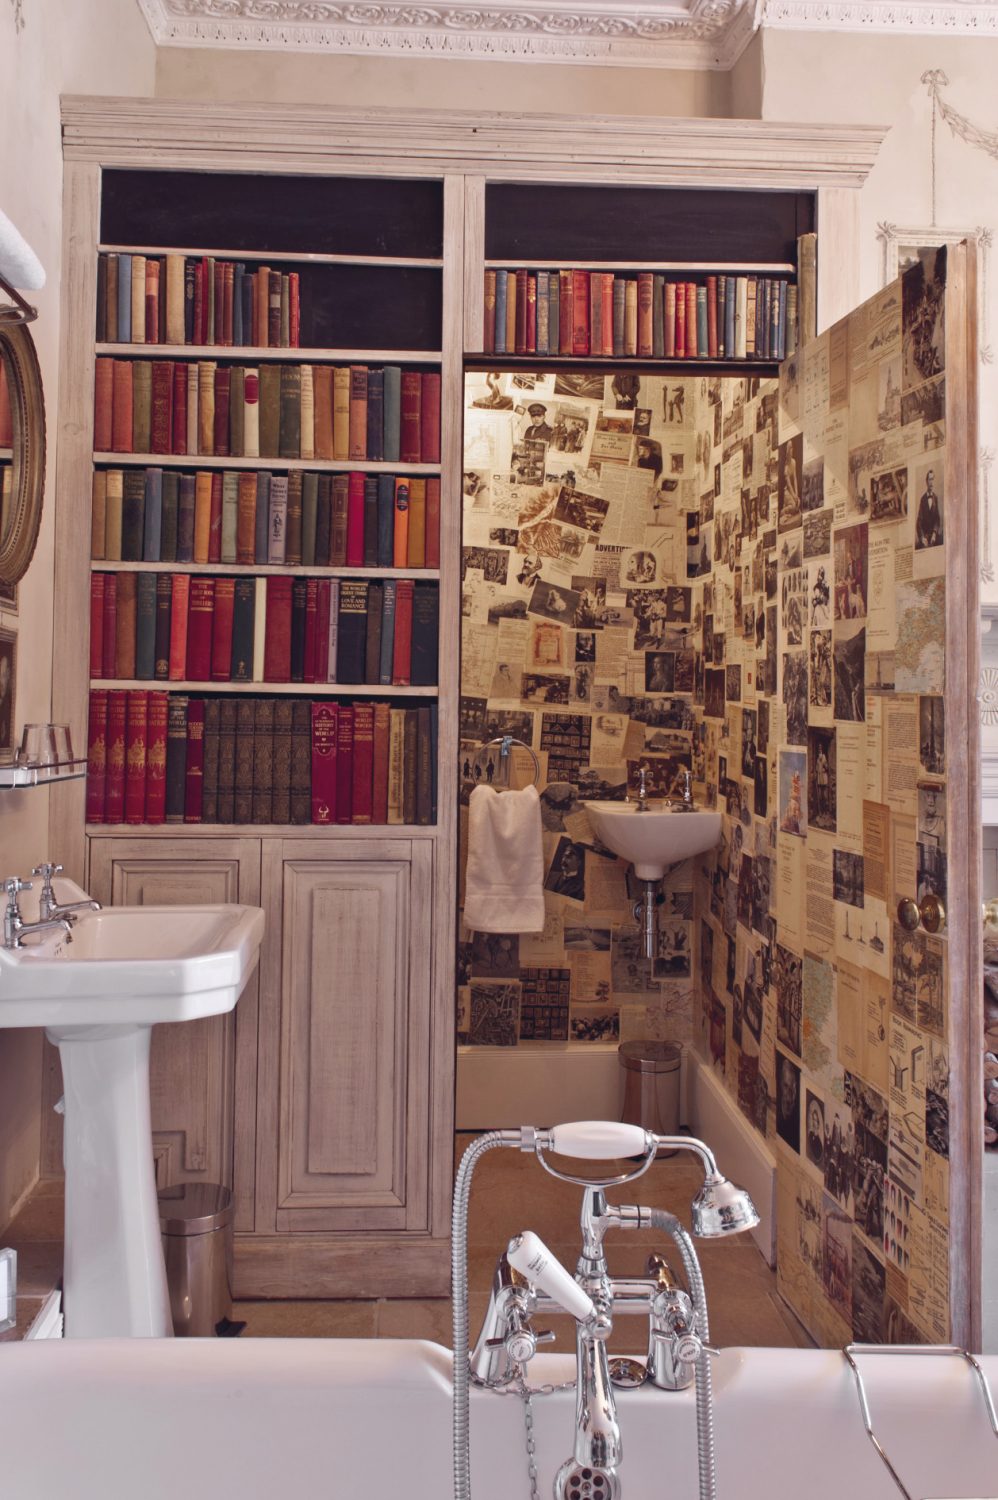 The hidden loo with walls papered with the pages of book